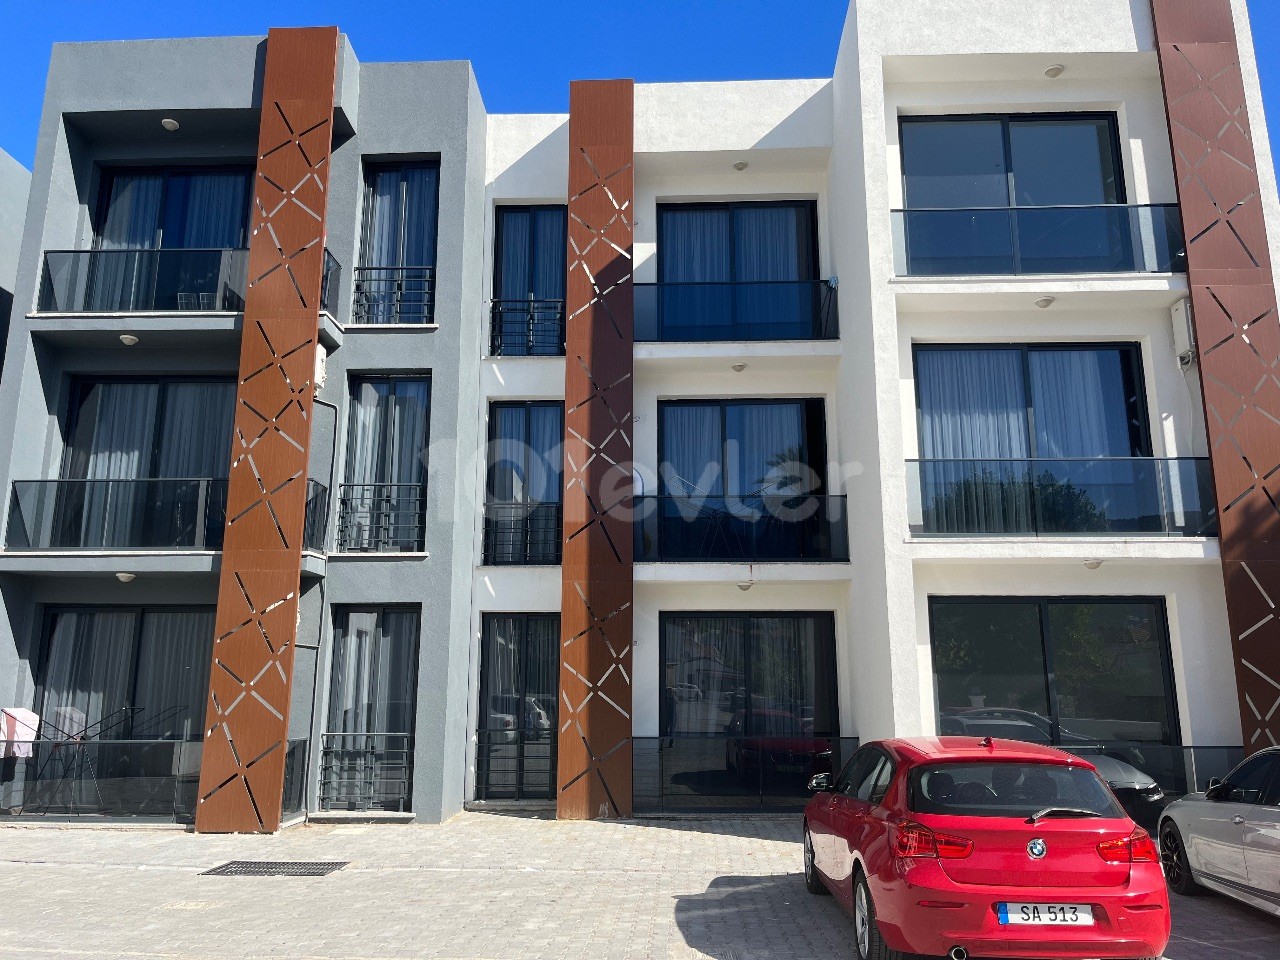 Luxury 2+1 Apartment on the Back Street of Şokmar Premium, Close to the Merit Hotels Area, 20 Meters from the Road and the Minibus Route, and with Camelot Beach Ahead.